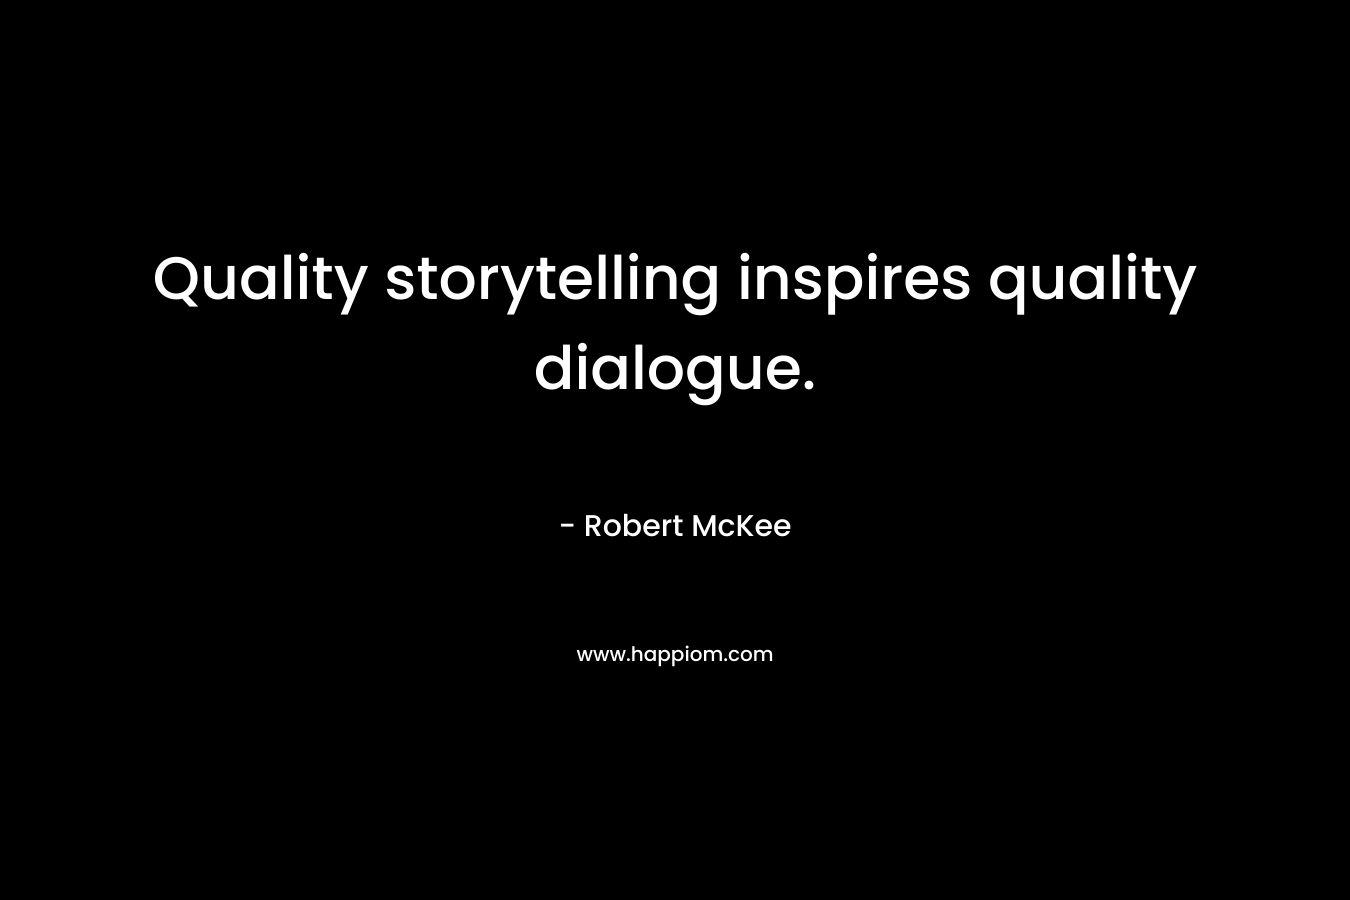 Quality storytelling inspires quality dialogue.